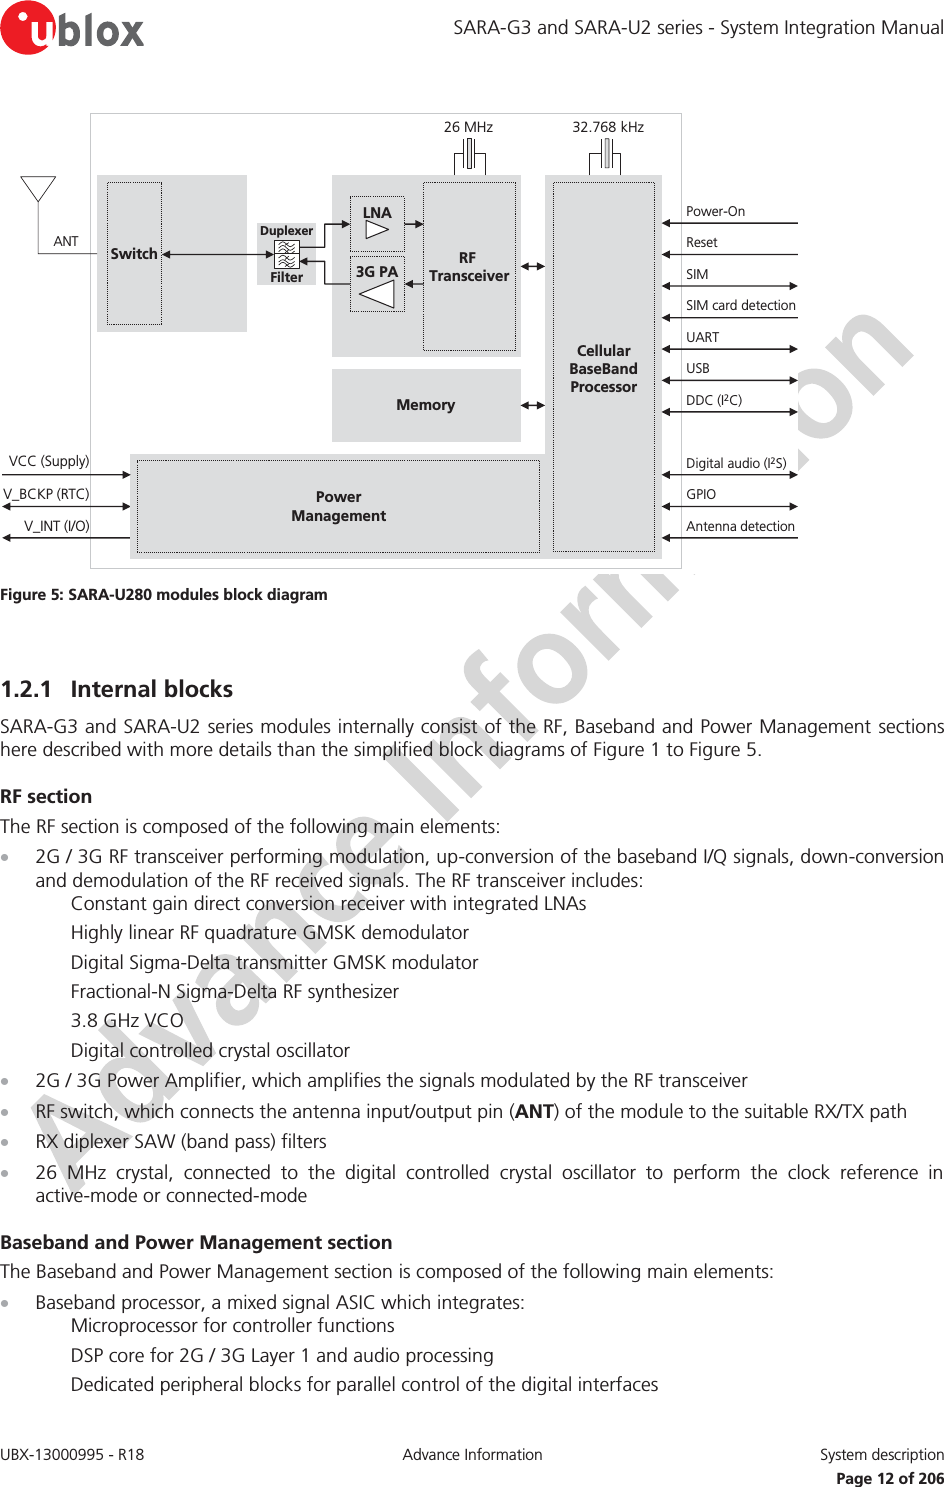 SARA-G3 and SARA-U2 series - System Integration Manual UBX-13000995 - R18  Advance Information  System description   Page 12 of 206 MemoryV_BCKP (RTC)V_INT (I/O)RF TransceiverPowerManagementCellularBaseBandProcessorANTVCC (Supply)USBDDC (I2C)SIM card detectionSIMUARTPower-OnResetDigital audio (I2S)GPIOAntenna detection3G PA26 MHzDuplexerFilterSwitchLNA32.768 kHz Figure 5: SARA-U280 modules block diagram  1.2.1 Internal blocks SARA-G3 and SARA-U2 series modules internally consist of the RF, Baseband and Power Management sections here described with more details than the simplified block diagrams of Figure 1 to Figure 5. RF section The RF section is composed of the following main elements: x 2G / 3G RF transceiver performing modulation, up-conversion of the baseband I/Q signals, down-conversion and demodulation of the RF received signals. The RF transceiver includes: Constant gain direct conversion receiver with integrated LNAs Highly linear RF quadrature GMSK demodulator Digital Sigma-Delta transmitter GMSK modulator Fractional-N Sigma-Delta RF synthesizer 3.8 GHz VCO Digital controlled crystal oscillator x 2G / 3G Power Amplifier, which amplifies the signals modulated by the RF transceiver x RF switch, which connects the antenna input/output pin (ANT) of the module to the suitable RX/TX path x RX diplexer SAW (band pass) filters x 26 MHz crystal, connected to the digital controlled crystal oscillator to perform the clock reference in active-mode or connected-mode Baseband and Power Management section The Baseband and Power Management section is composed of the following main elements: xBaseband processor, a mixed signal ASIC which integrates:Microprocessor for controller functionsDSP core for 2G / 3G Layer 1 and audio processing Dedicated peripheral blocks for parallel control of the digital interfaces 